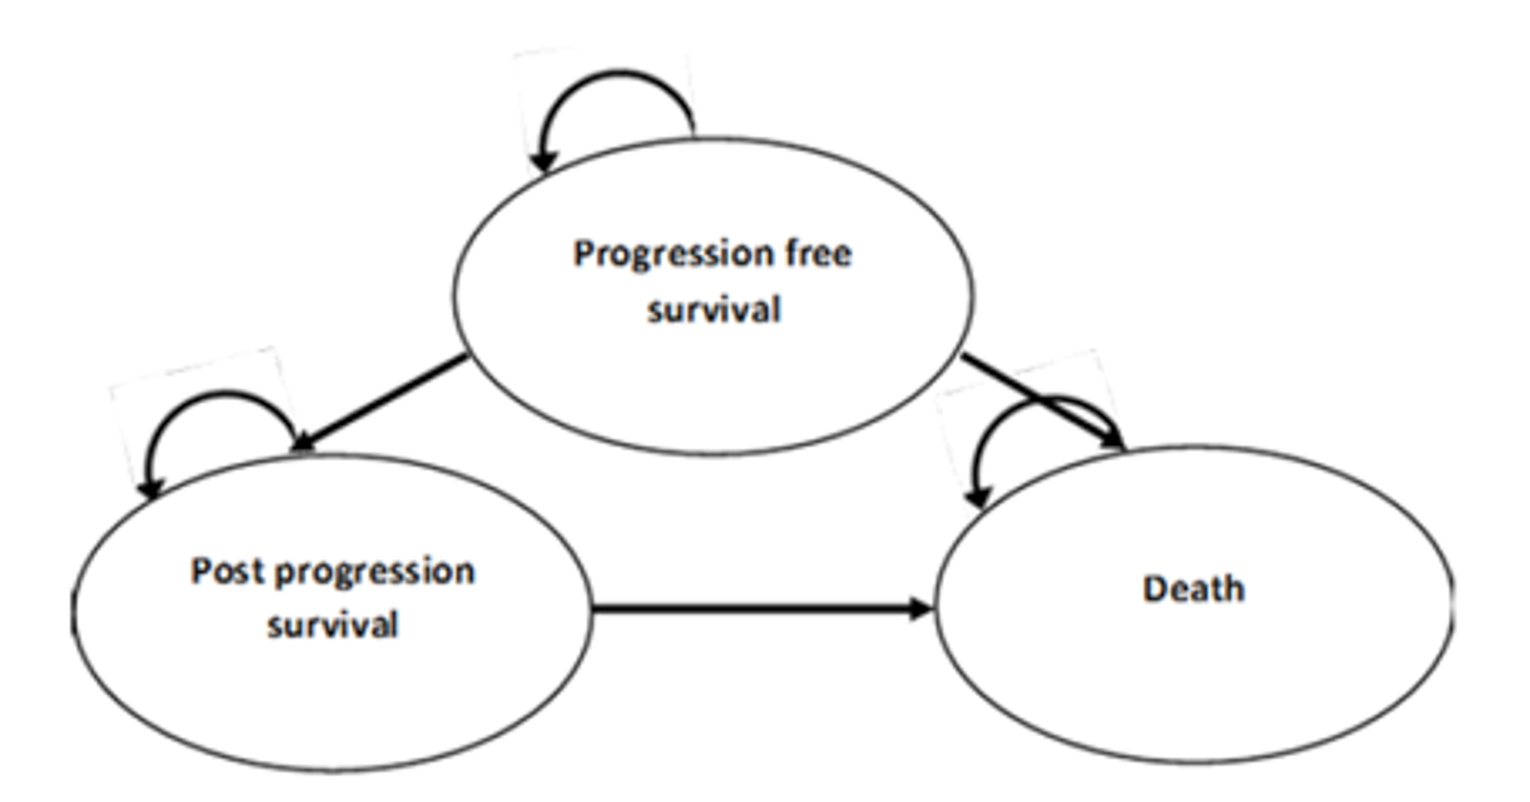 Diagram of a 3-state Markov model consisting of progression-free survival, post-progression survival, and death. Individuals can remain in each state or transition accordingly (as acknowledged by arrows between states). Progression-free survival can move to post-progression survival or death, and post-progression survival can move to death.